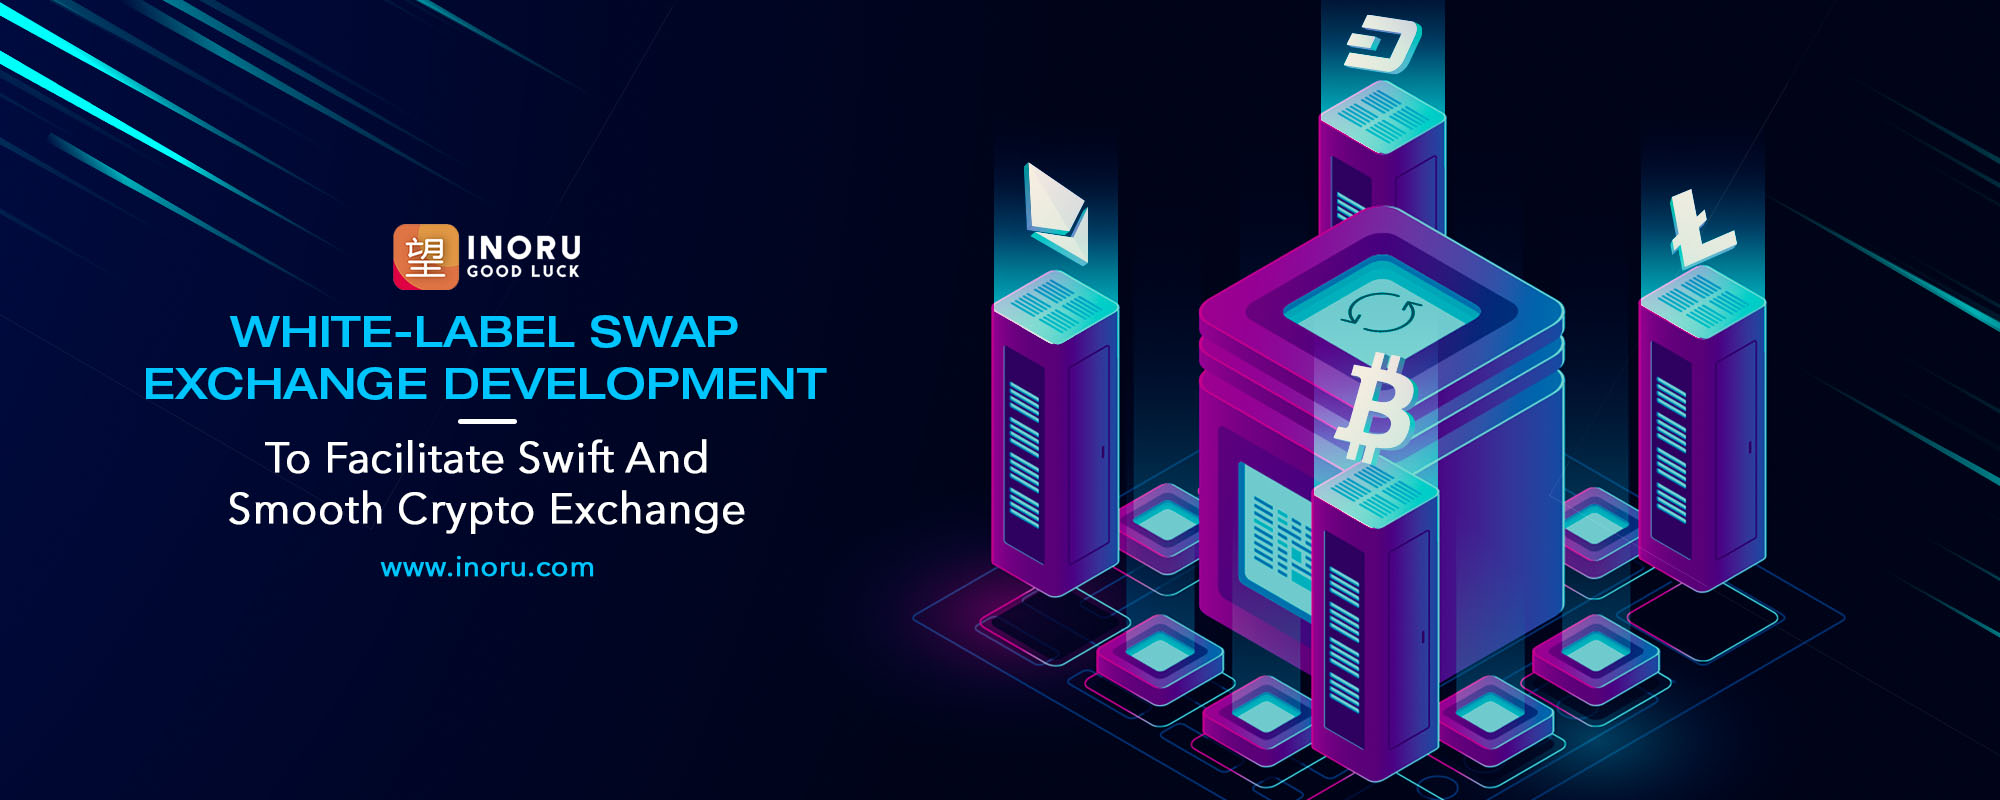 Get A Clear Insight On White-Label Swap Exchange Development